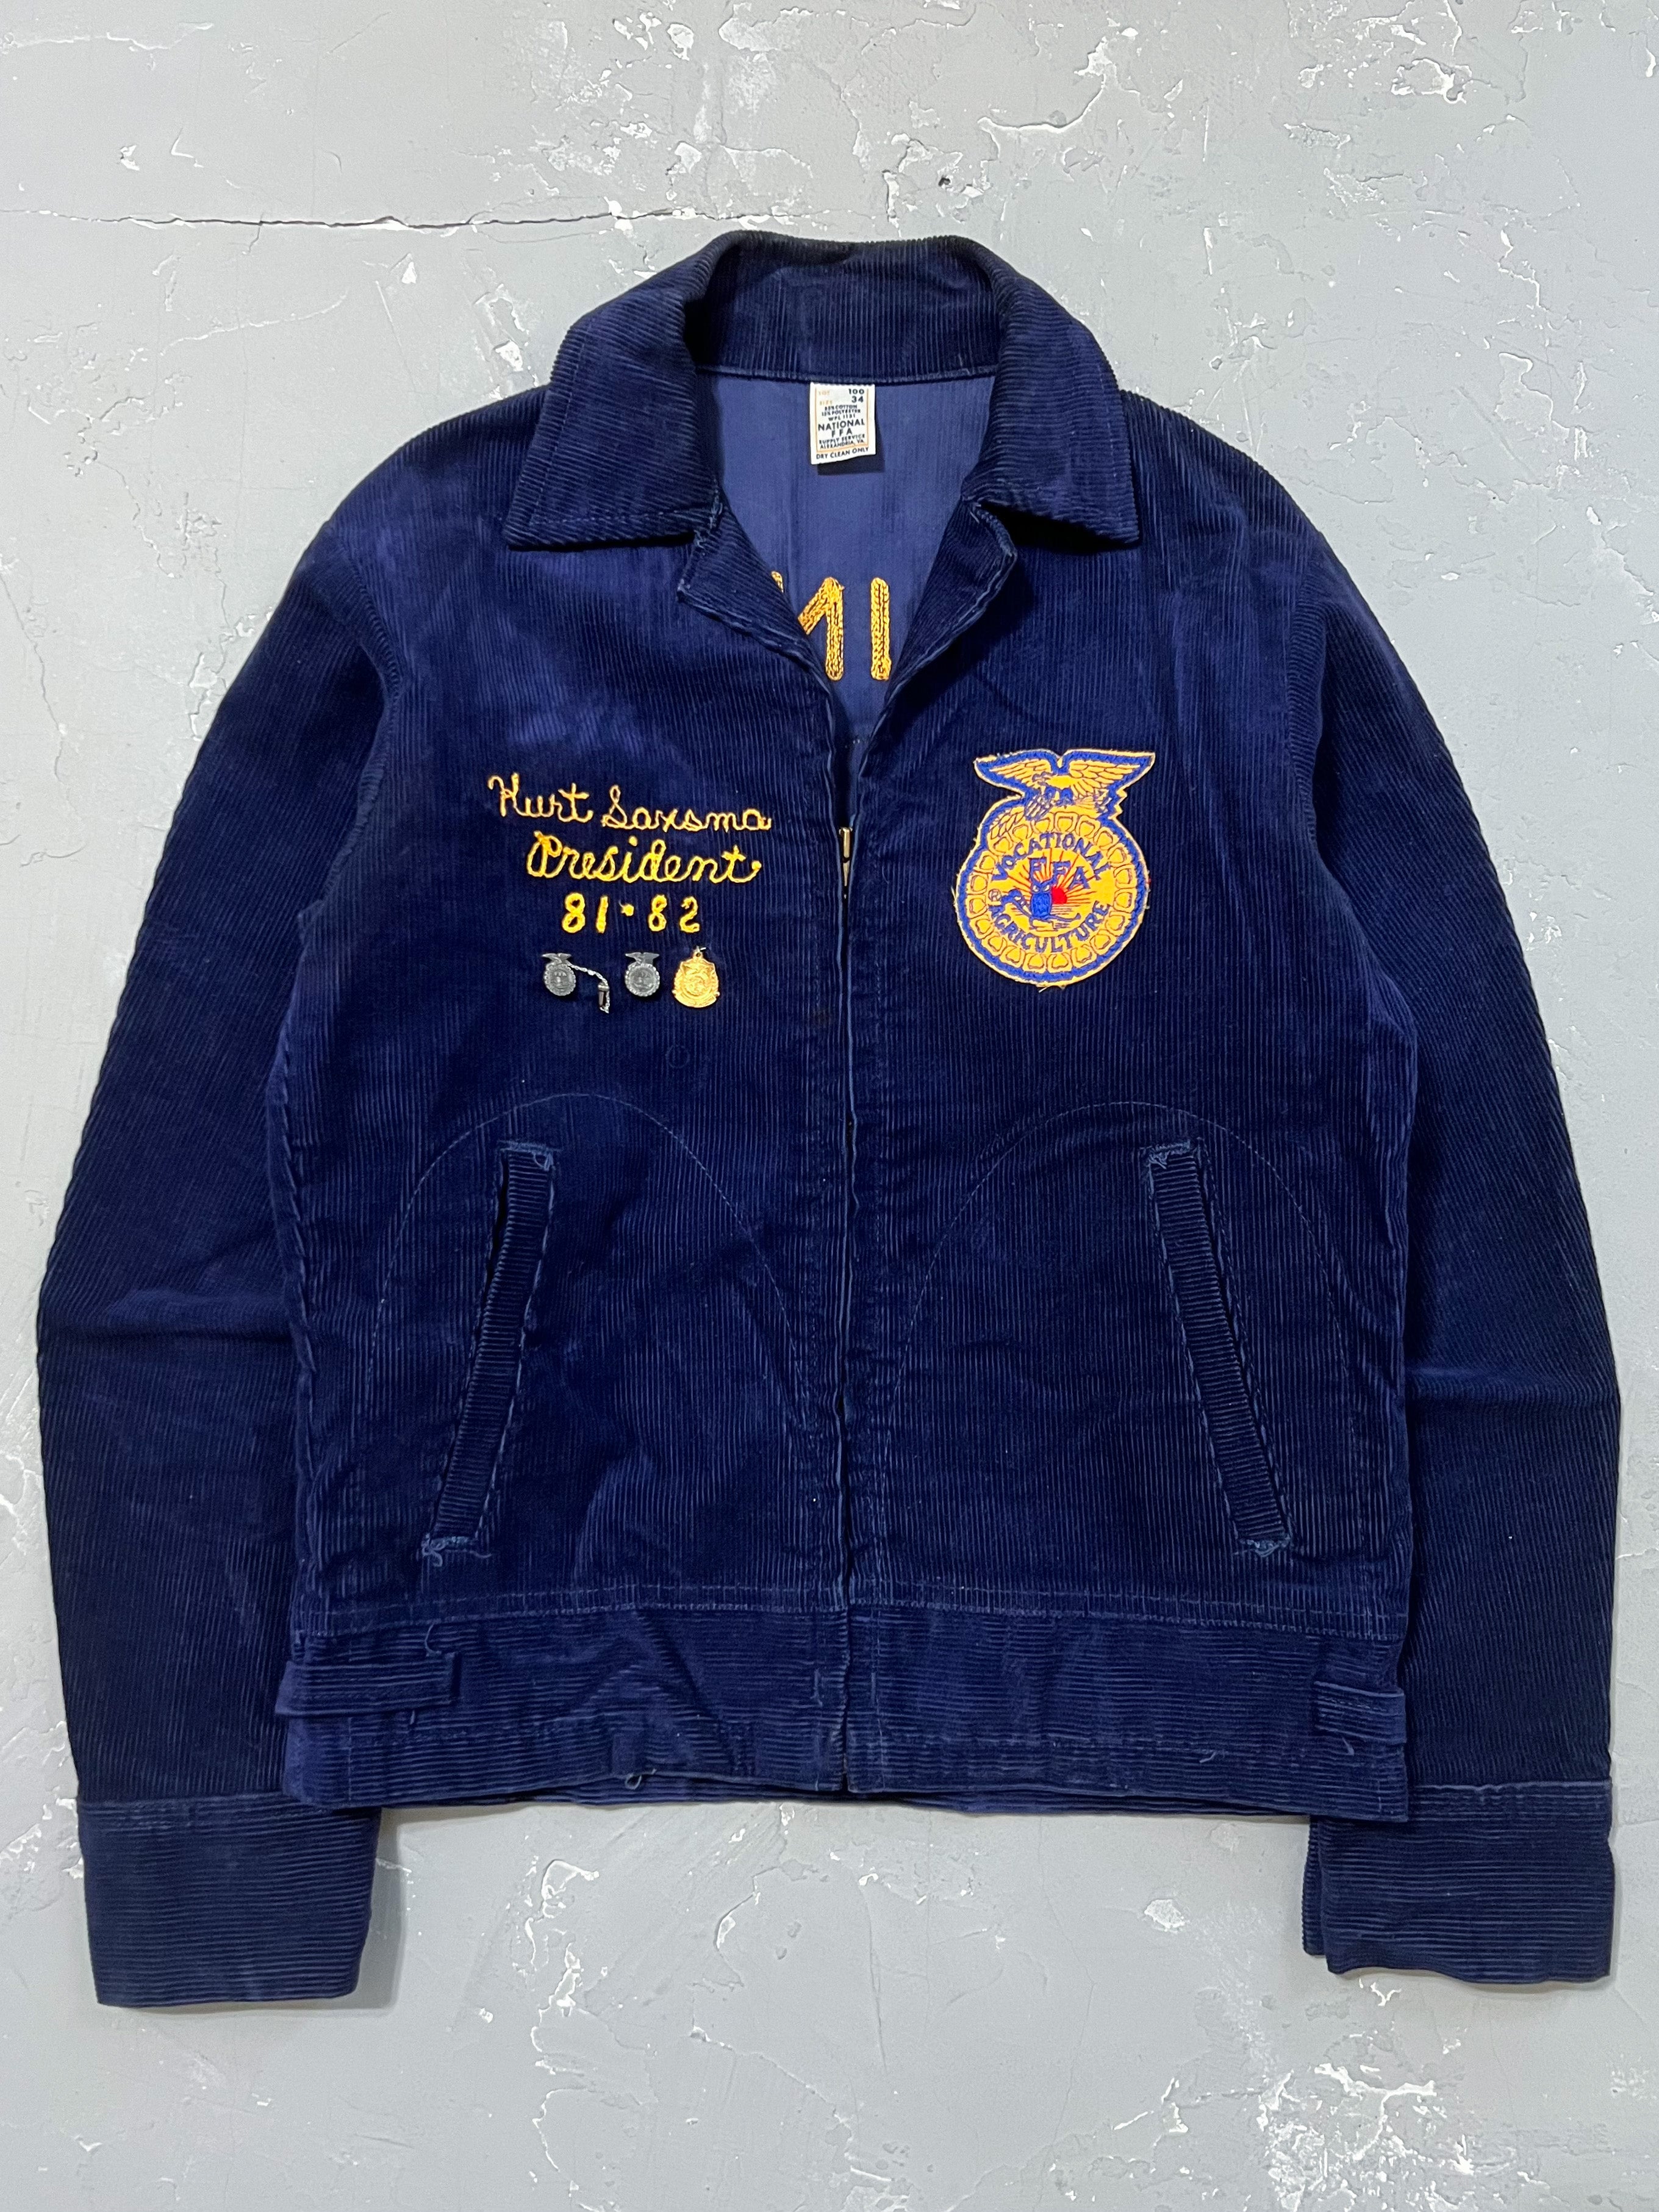 1982 “Clifton Central Illinois” Corduroy FFA Jacket [S] – From The